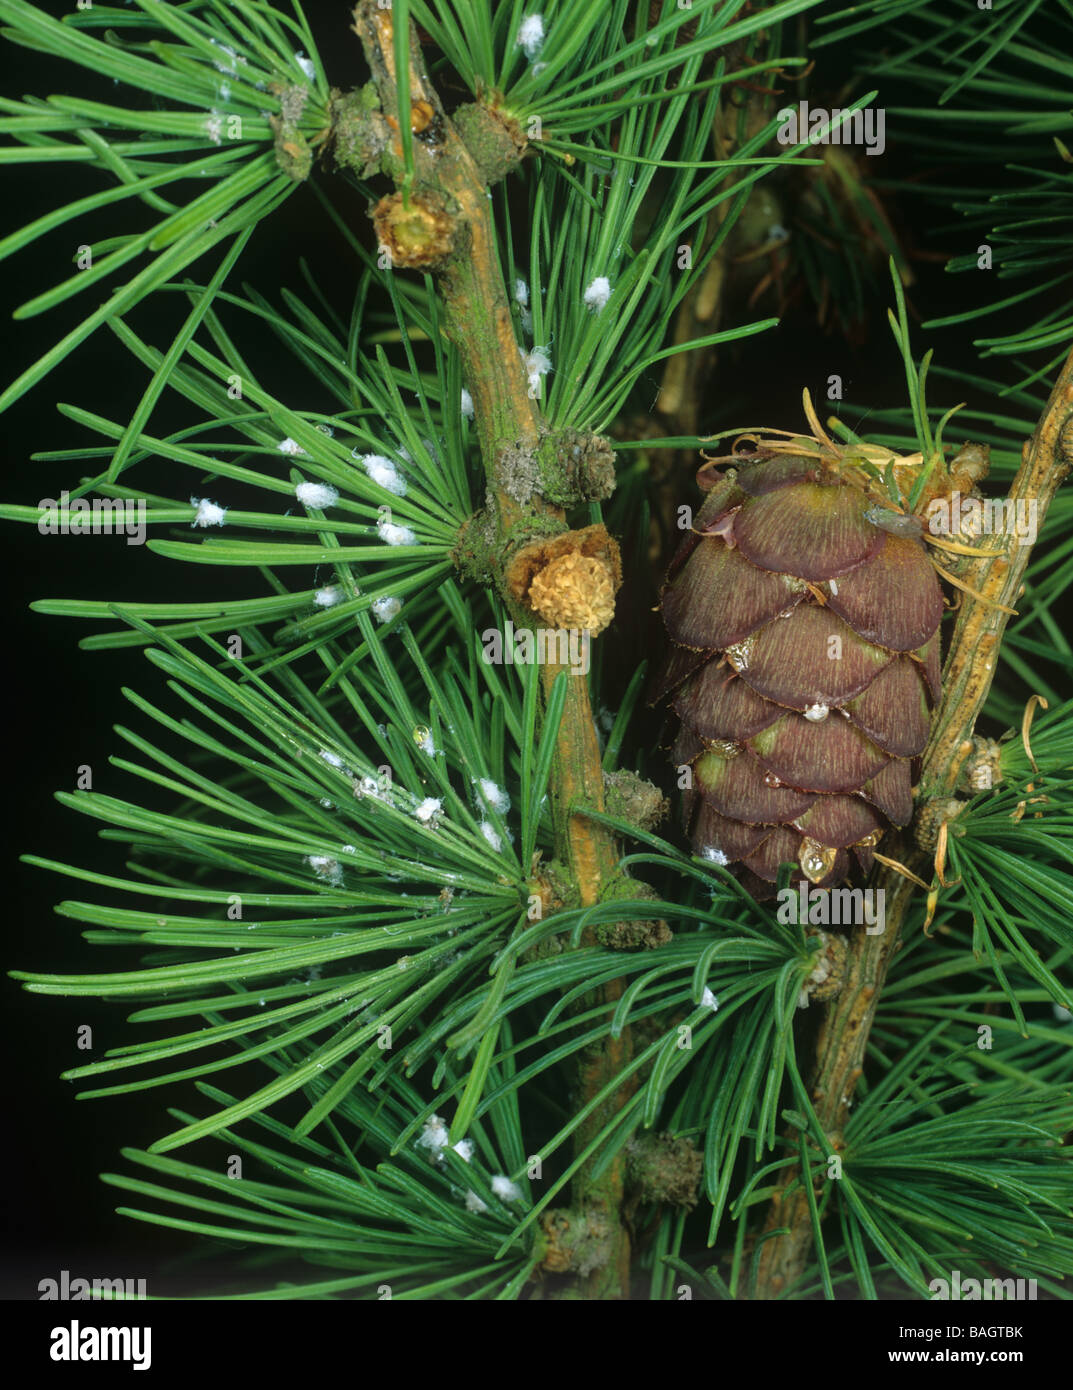 Larch adelges Adelges laricis waxy white masses of pest insects on larch needles Stock Photo